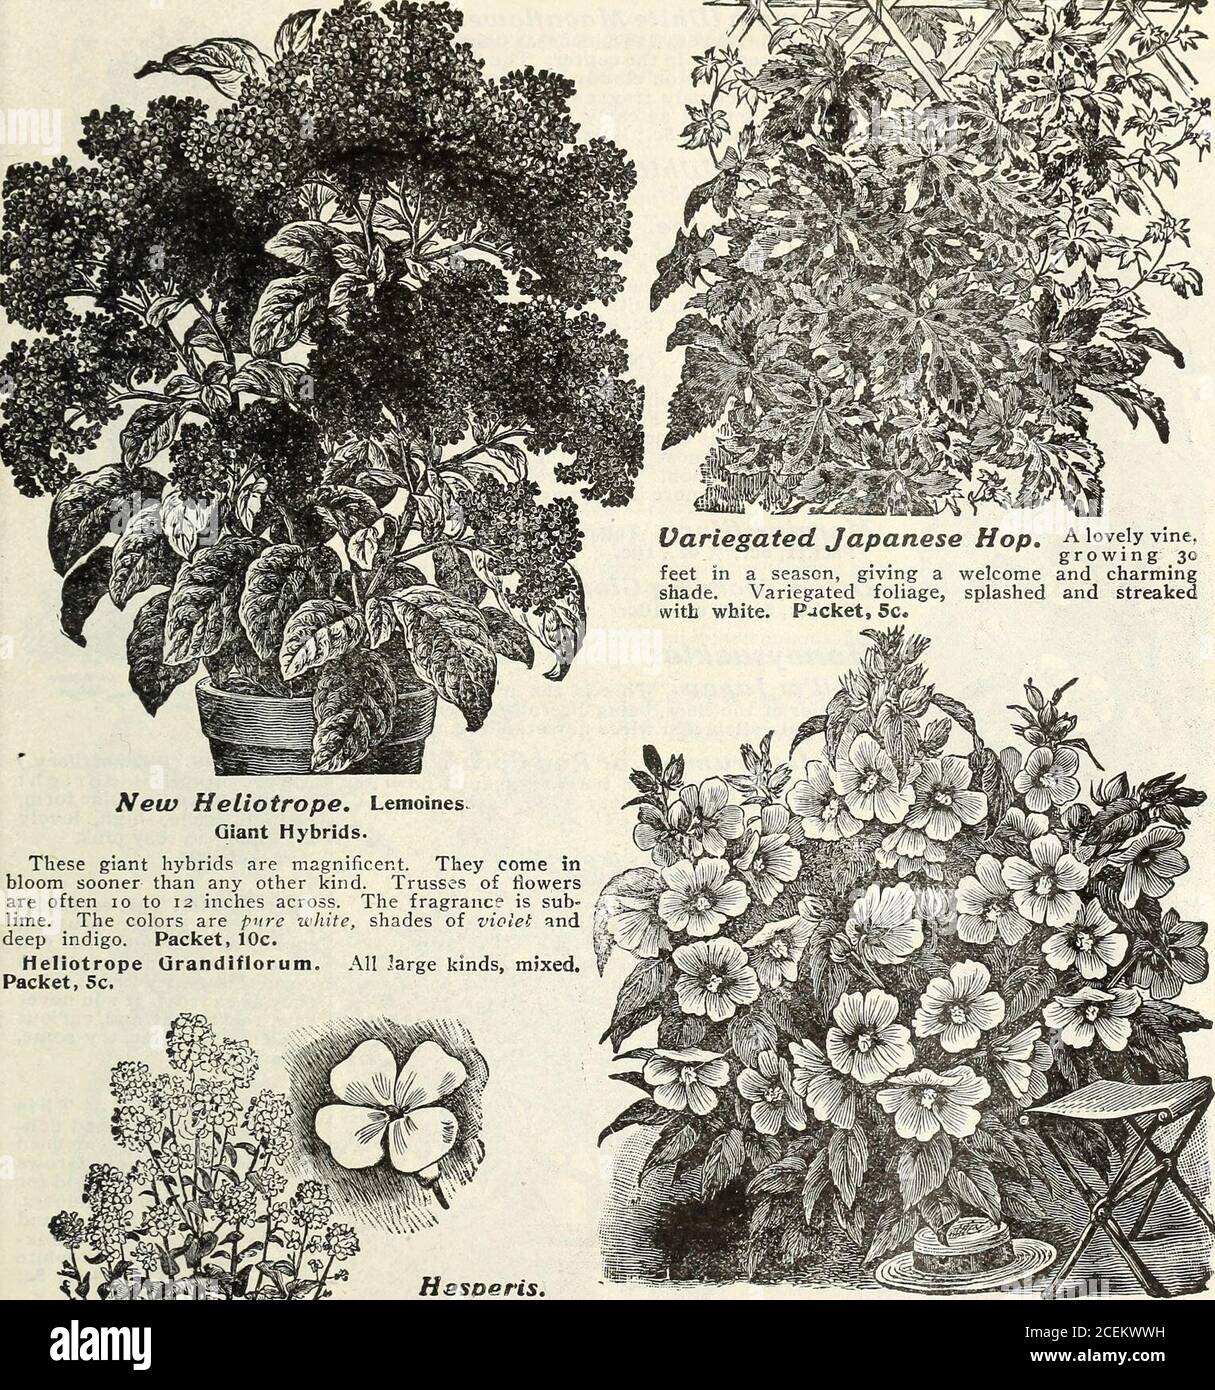 . Flowers & vegetables for 1920 springtime. Strons plants, ?0c. each; 3 for 50c. PLANTS OP HARDY OAILLARDIAS„ ISc, 3 for 30e QAILLARDI LORENZIANA. A new double Gaillardia. This flower is most popular andfashionable. Long stems; good for vases, bouquets,or to wear singly for corsage or button-hole.Blooms continually all summer. Scarlets, yellows,claret, zoned, and beautifully bordered. A gem. Packet, (20 colors), 5c. GAILLARDIA PICTA, mixed. Very showy, largeflowers; like a peacock feather. In bloom allsummer. Packet (20 colors), 5c. MISS MARY E. MARTIN, FLORAL PARK. NEW YORK 23. Stock Photo